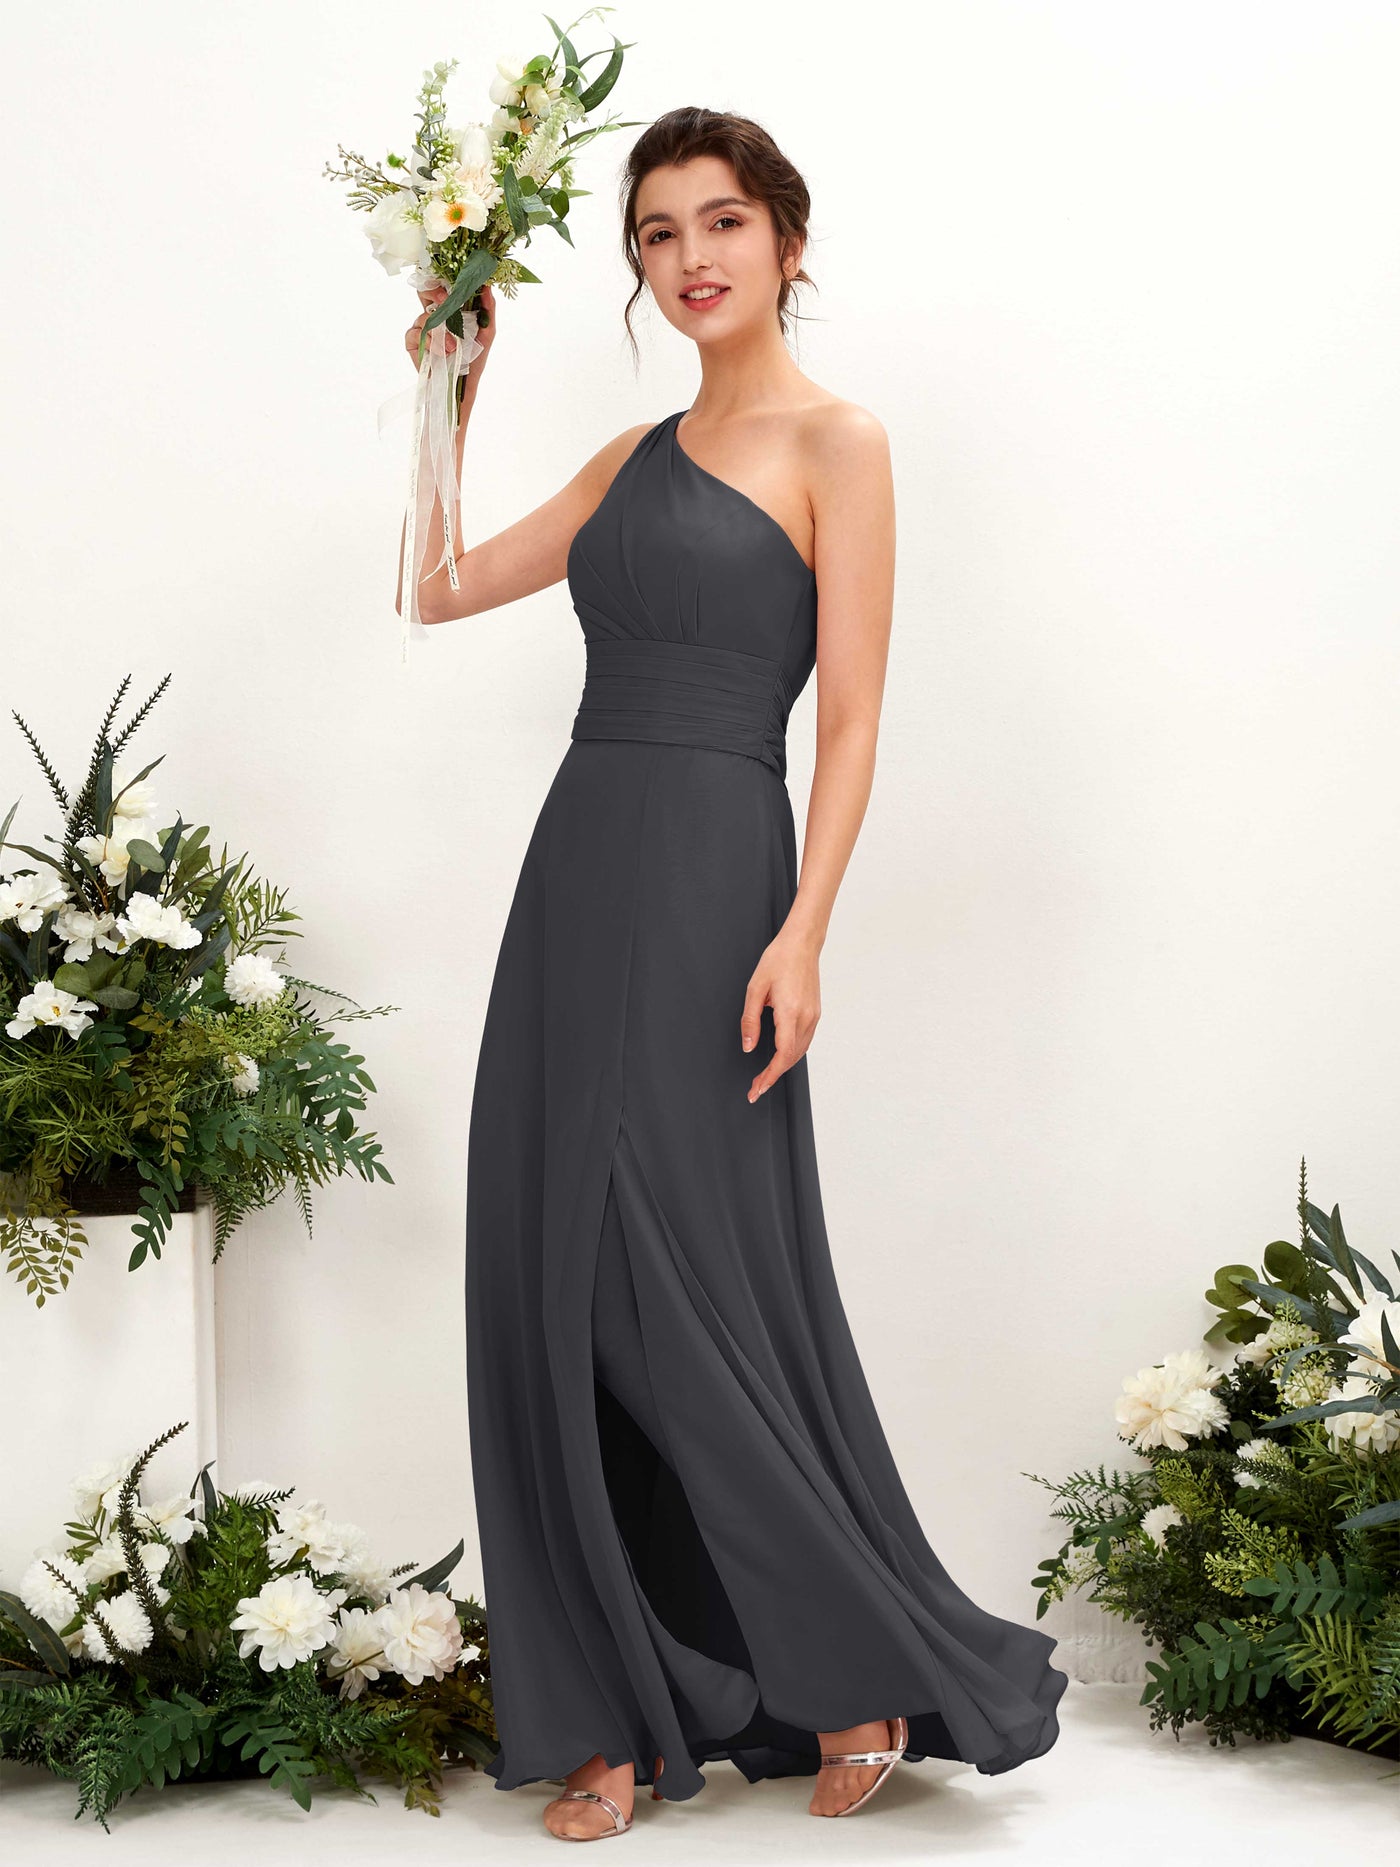 Pewter Bridesmaid Dresses Bridesmaid Dress A-line Chiffon One Shoulder Full Length Sleeveless Wedding Party Dress (81224738)#color_pewter